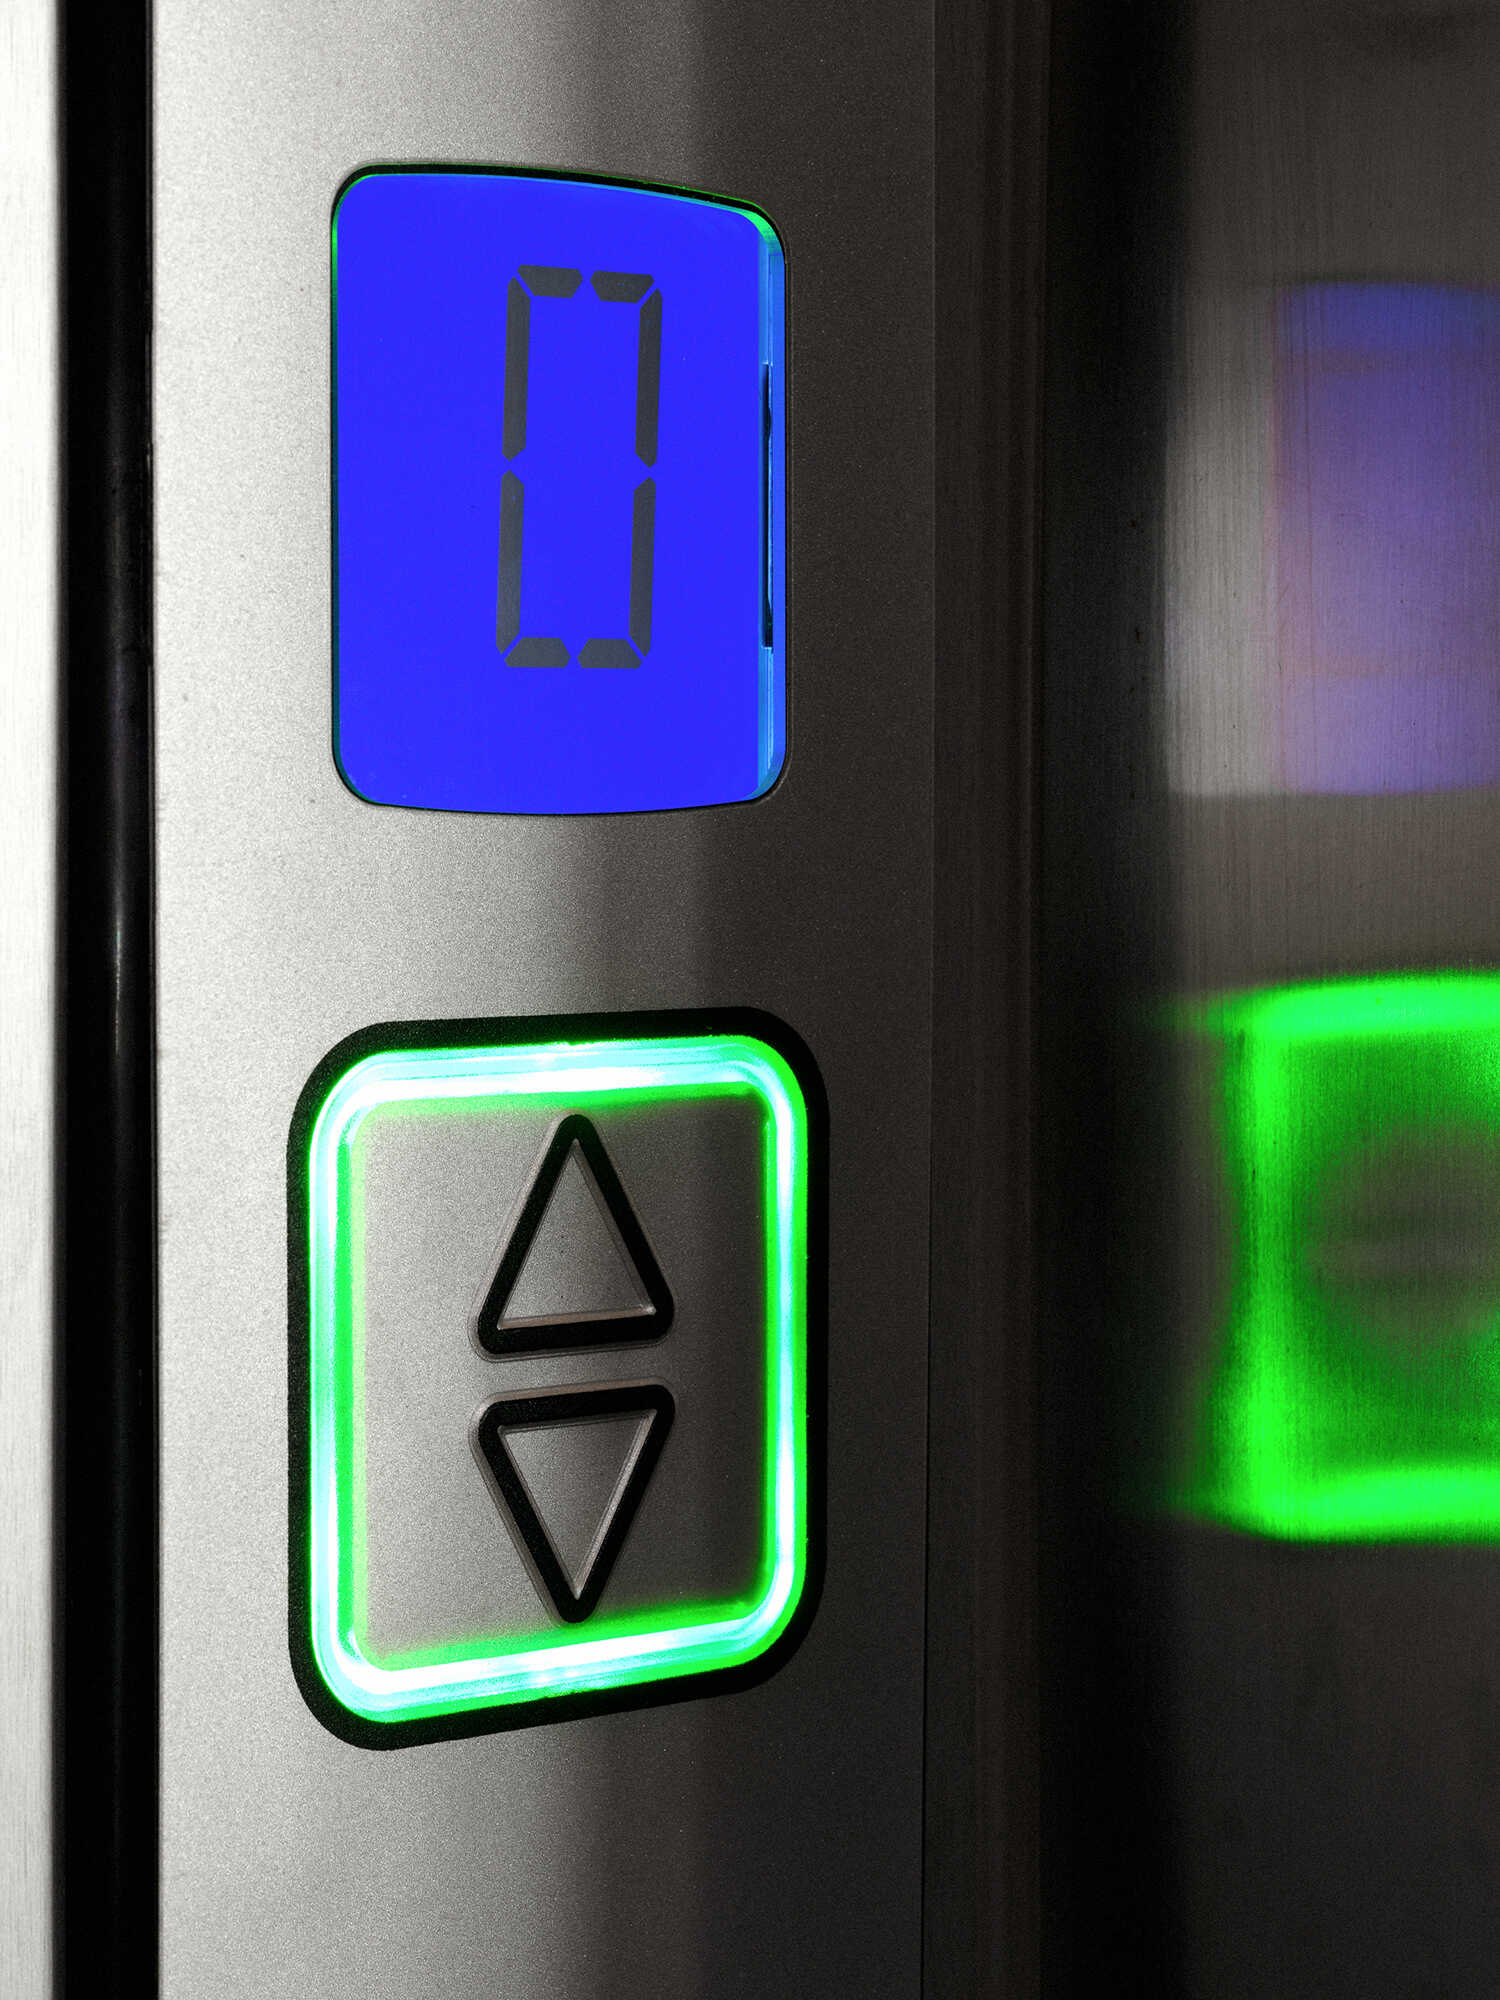 Aritco PublicLift button and display